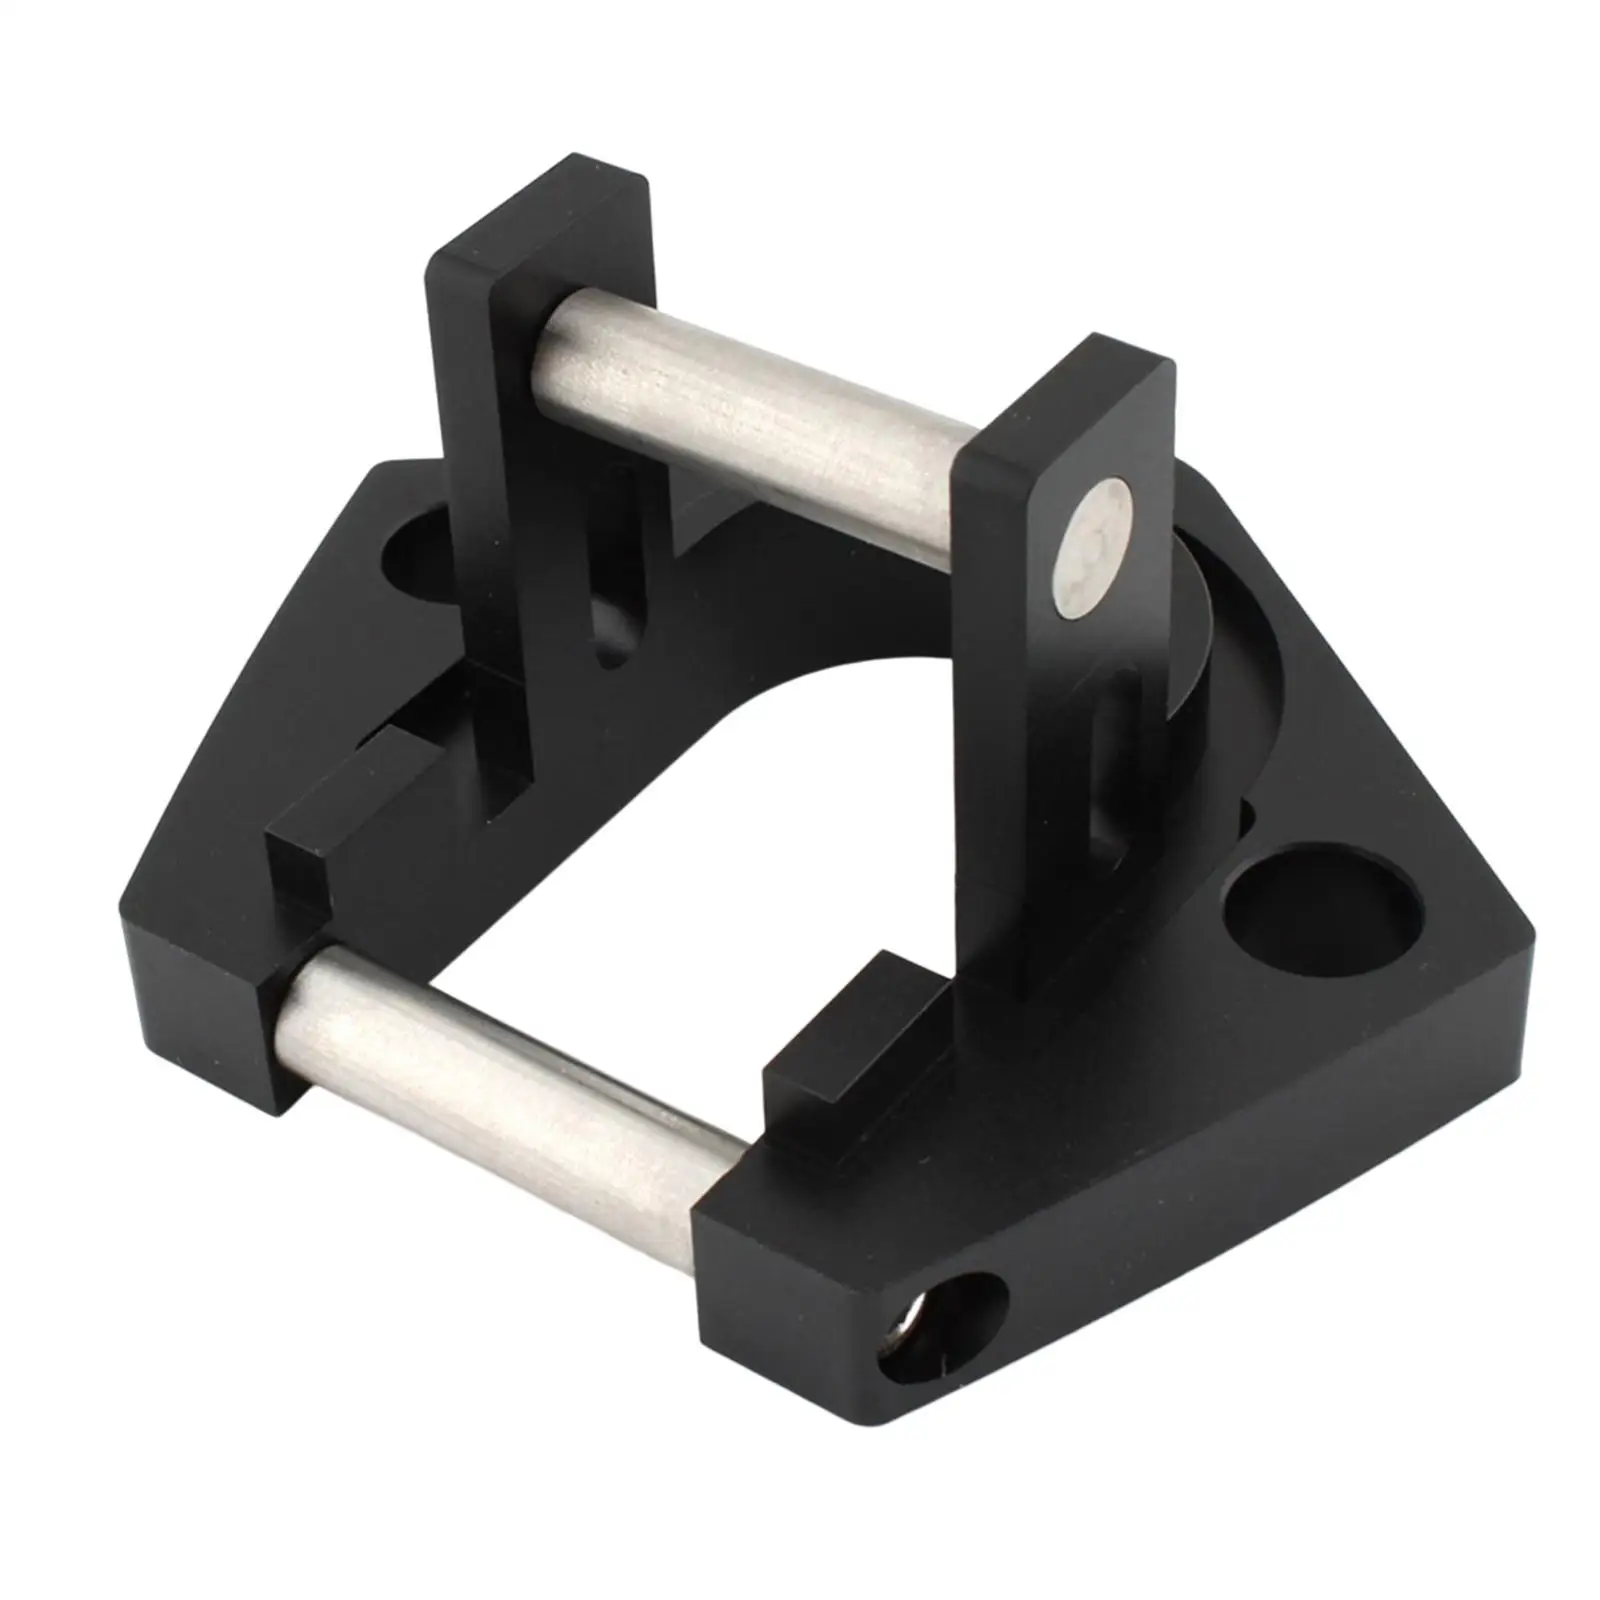 Lower Awning Arm Bottom Bracket Foot Assembly for Sunchaser II Solid Aluminum Easily Install Professional Accessory